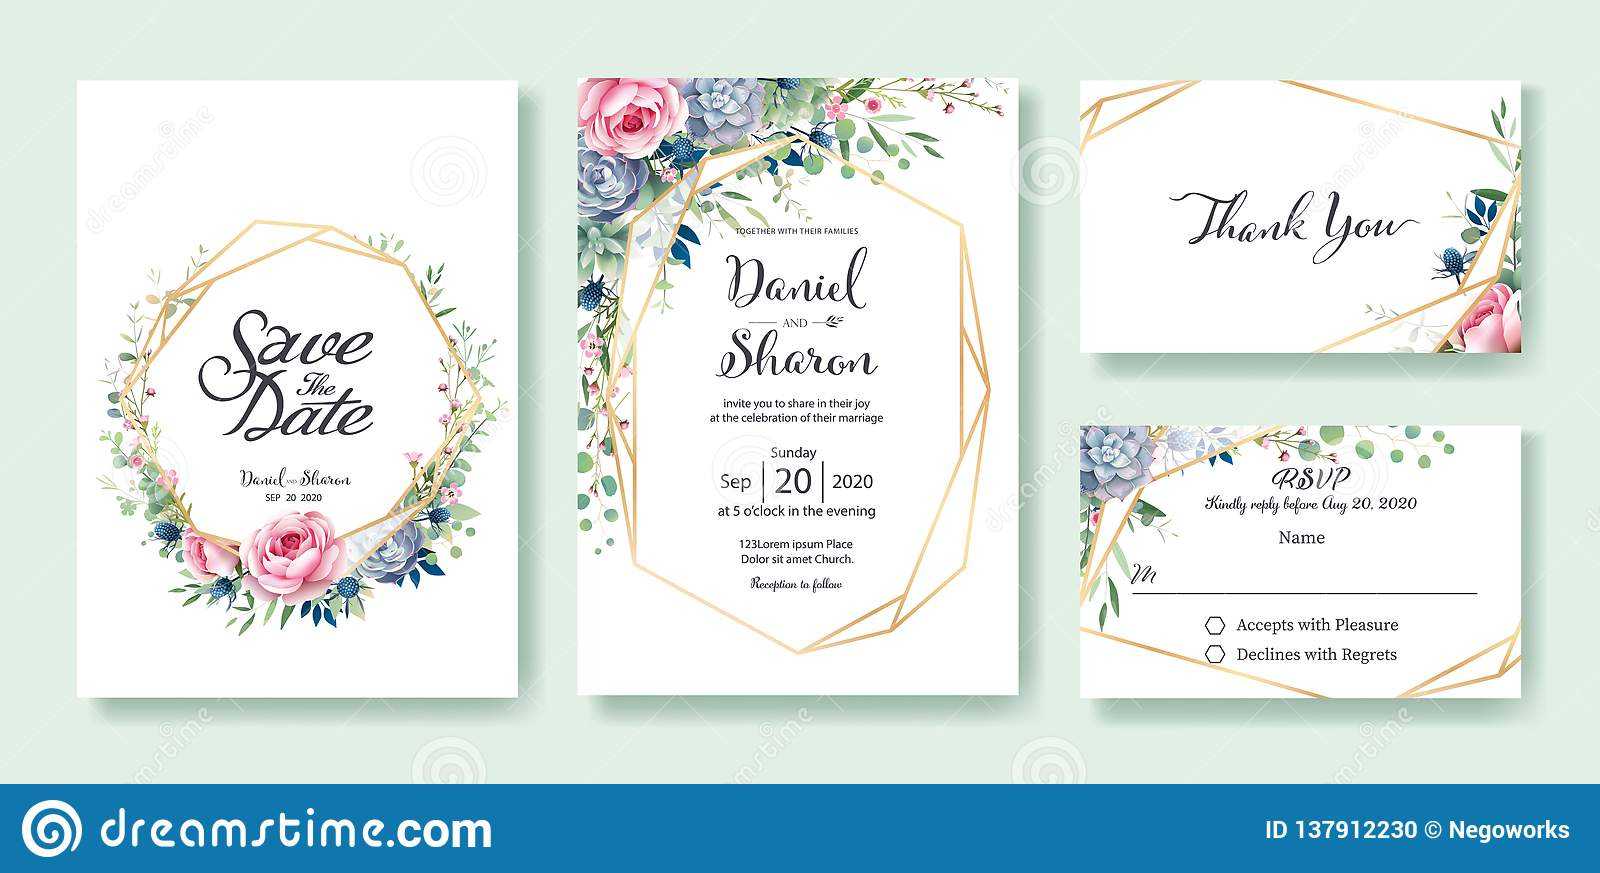 Wedding Invitation, Save The Date, Thank You, Rsvp Card Pertaining To Church Wedding Invitation Card Template